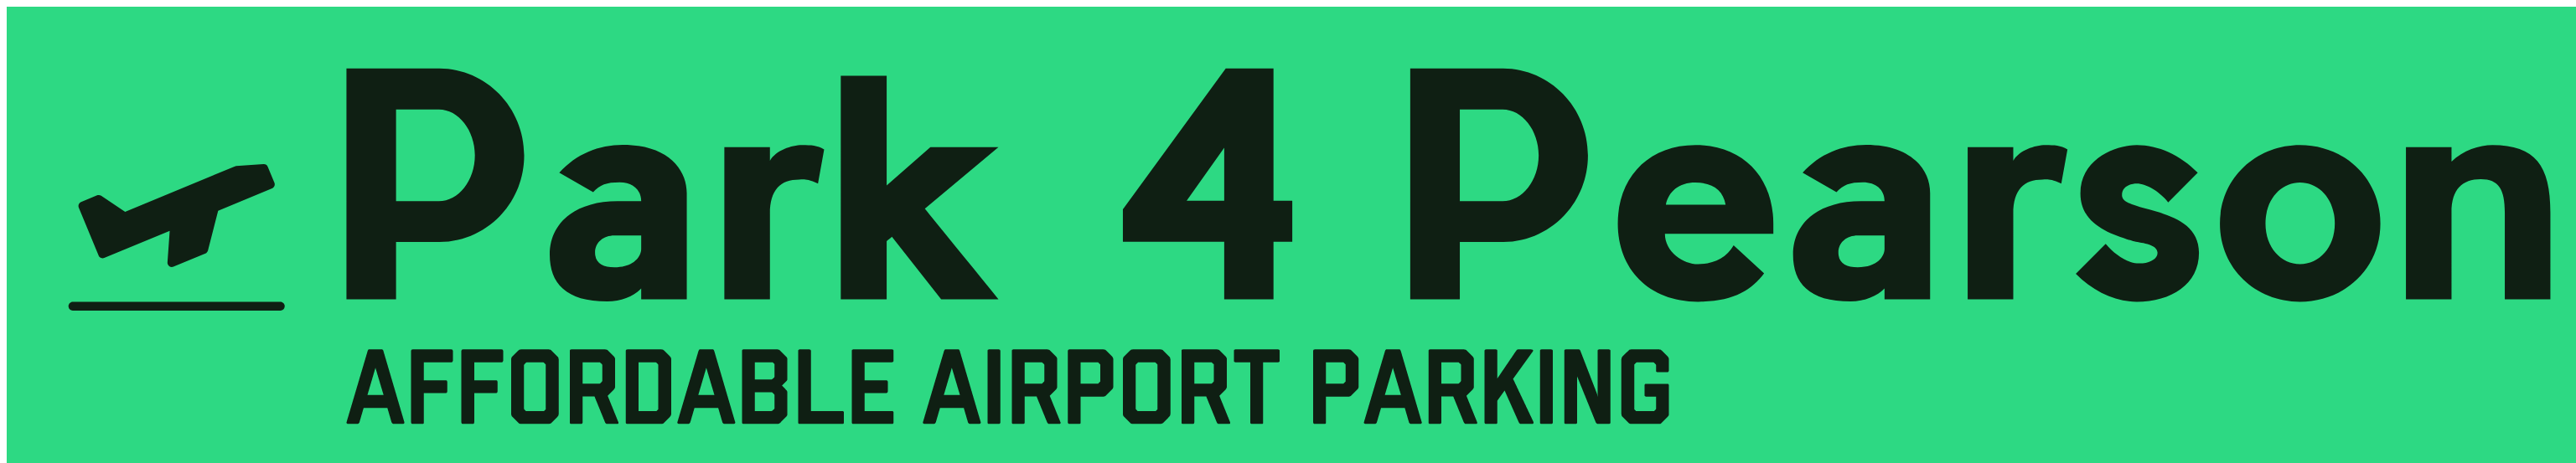 https://park4pearson.com/Images/p4p_color_logo_with_background.png